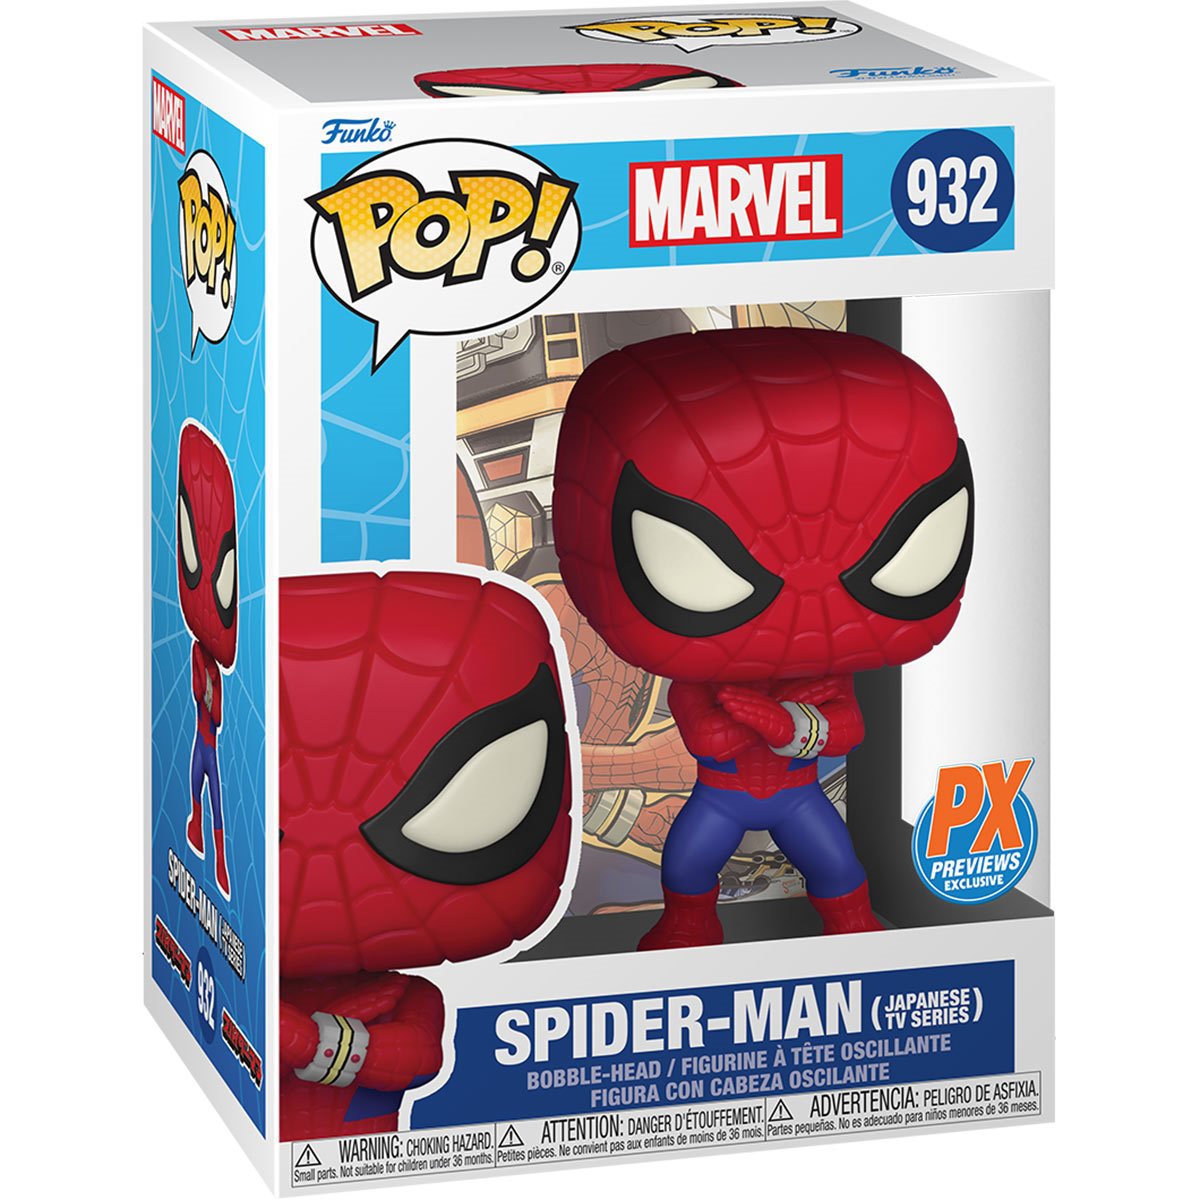 Funko POP! Marvel Marvel Spider-Man Japanese TV Series (Previews Exclusive)  (CHASE)